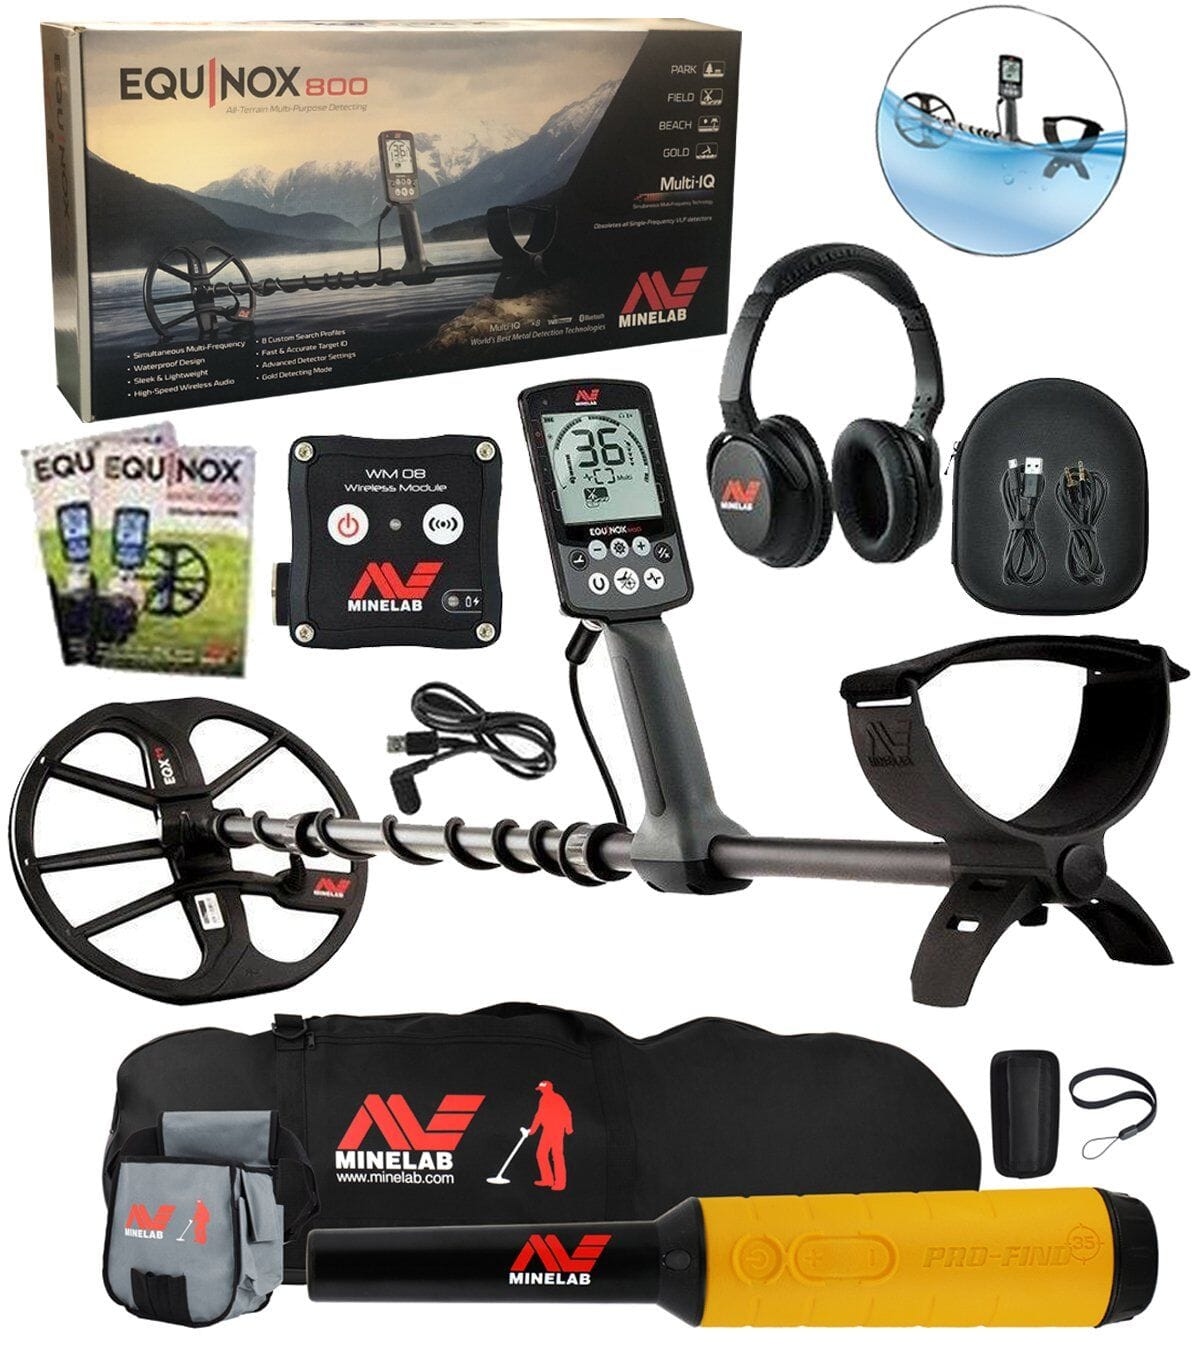 Amazon Returned Equinox 800 Metal Detector two coil Bundle, Pro-Find 35 Pointer with Minelab Gear